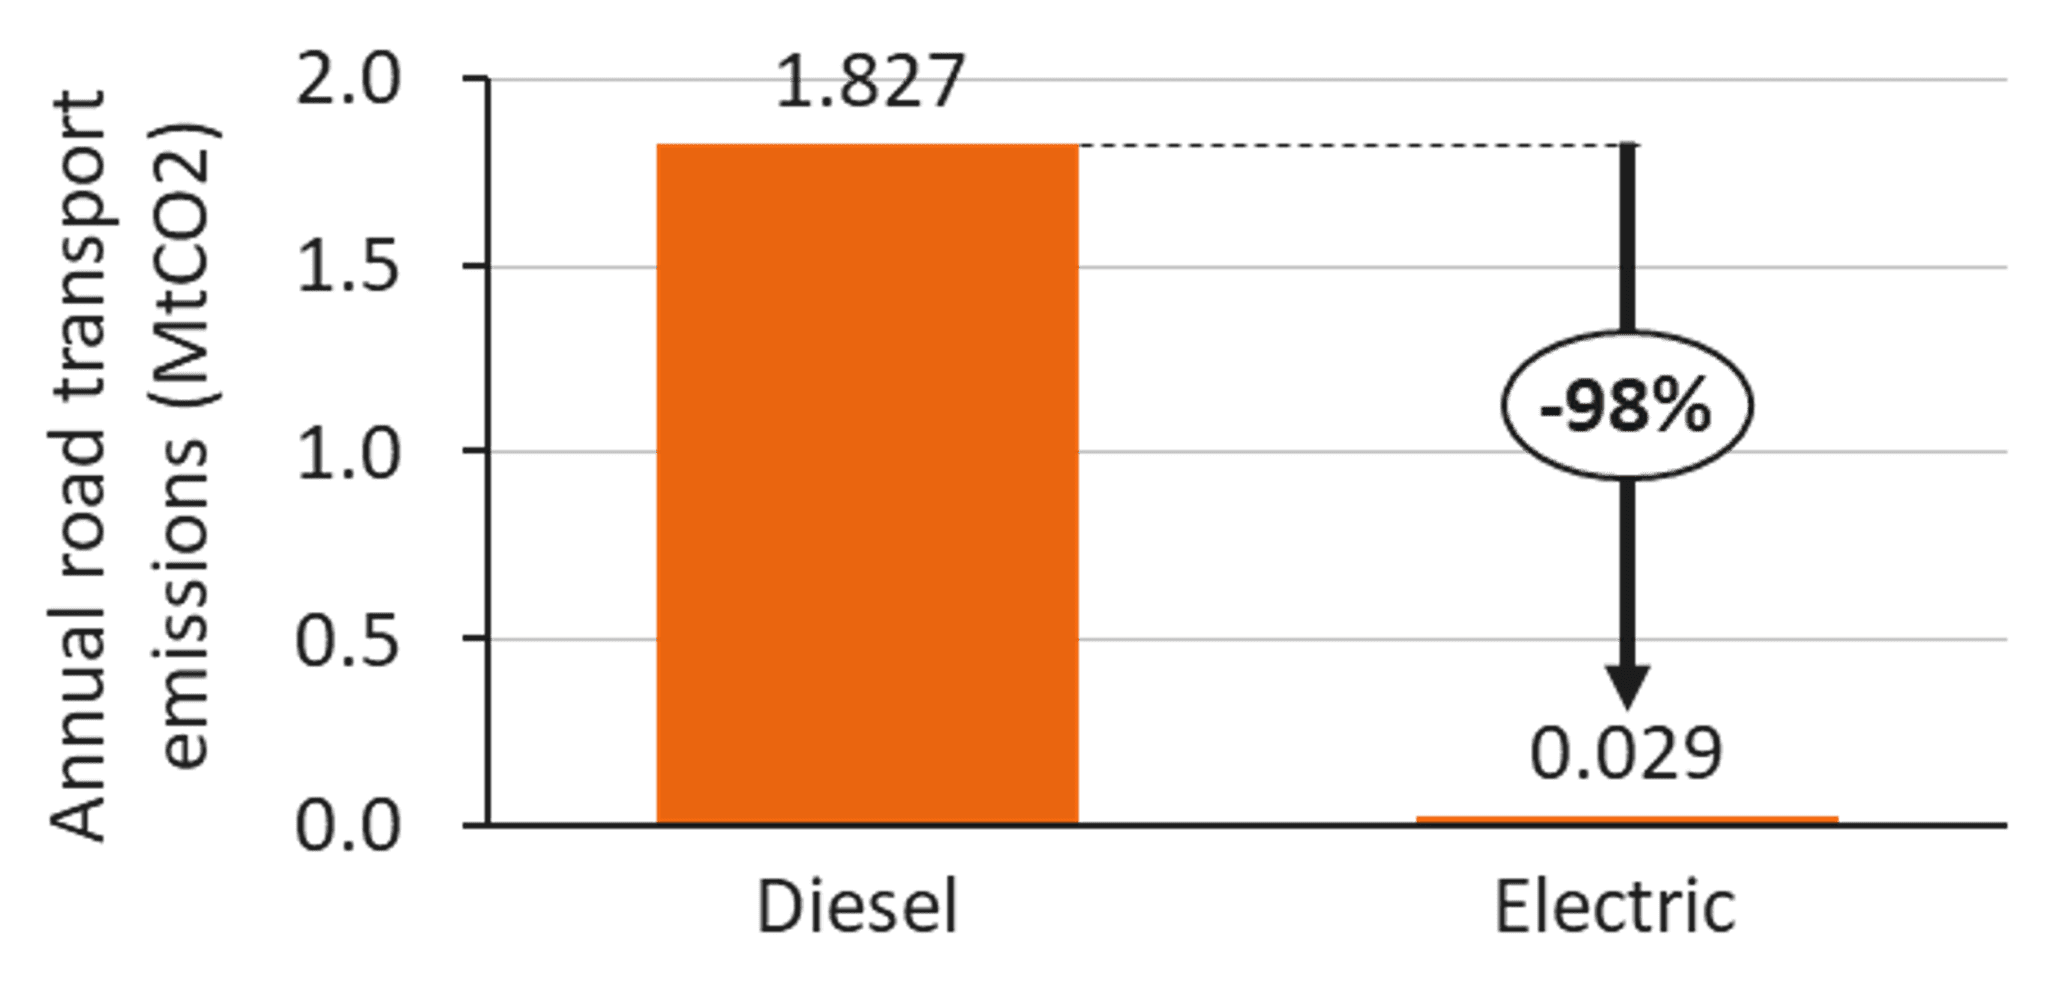 A bar chart (orange bars) shows the annual carbon emissions reduction for electrification of HGVs in Scotland. The annual carbon dioxide emissions for a fully diesel fleet is 1.827 mega-tonnes of carbon dioxide and the annual carbon dioxide emissions for a fully electrified fleet is 0.029 mega-tonnes of carbon dioxide. 